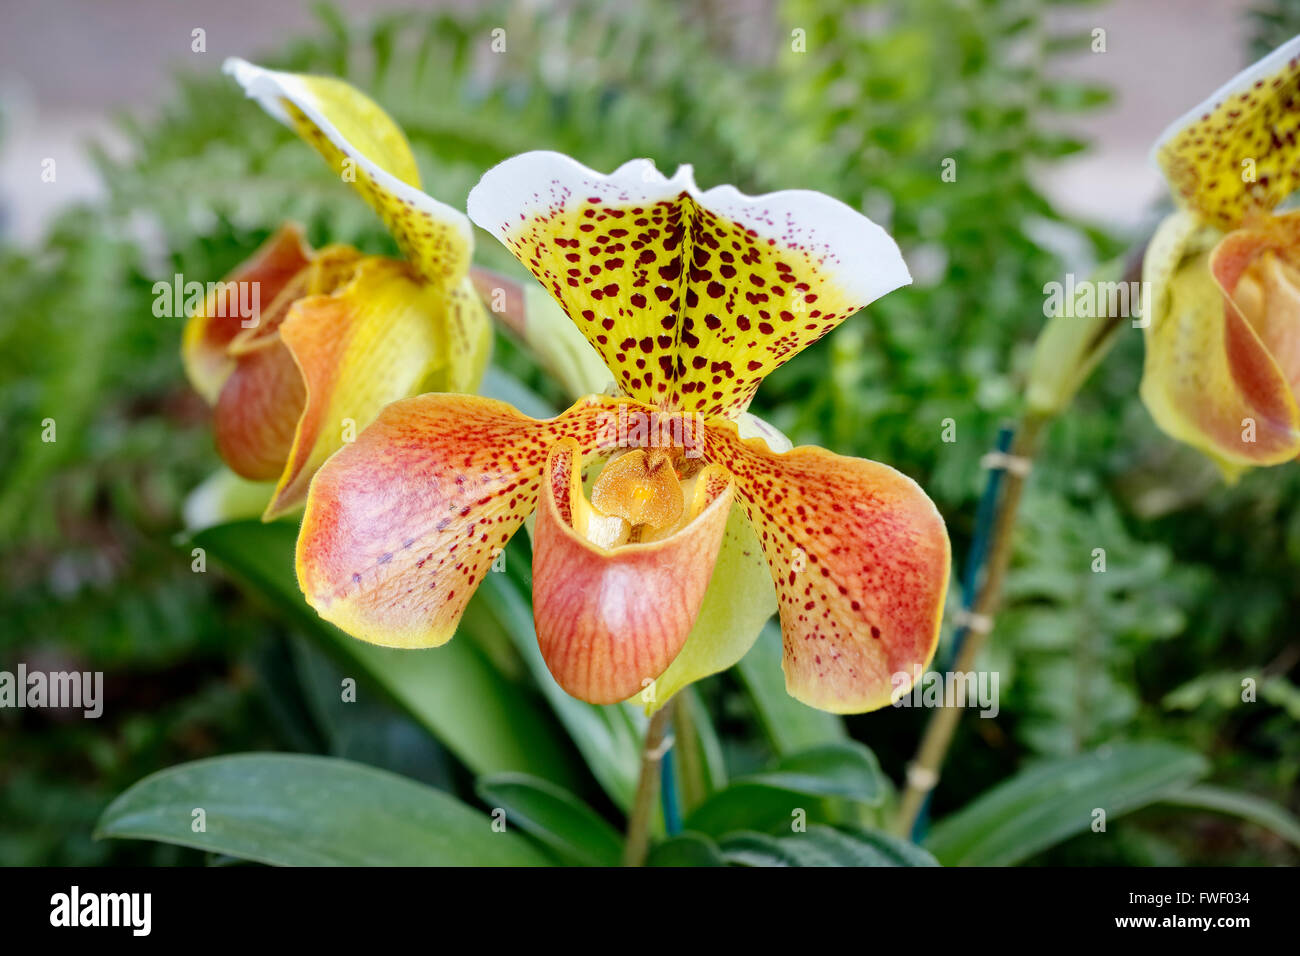 Paphiopedilum Or Venus Slipper A Yellow And Orange Spotted Orchid Stock Photo Alamy